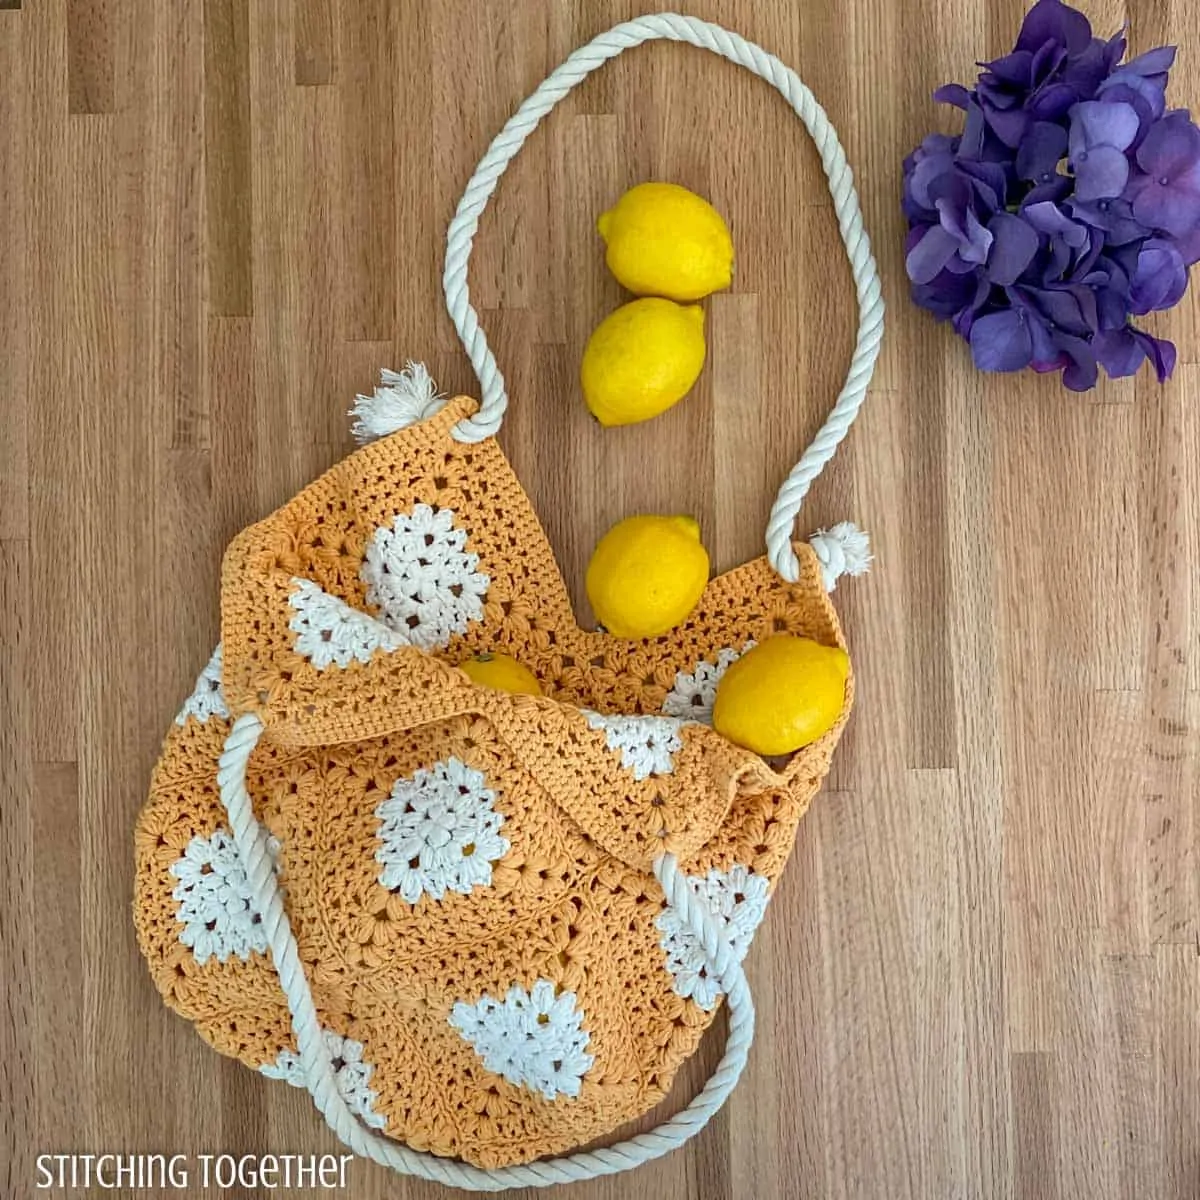 crochet market bag on a counter with lemons and flowers